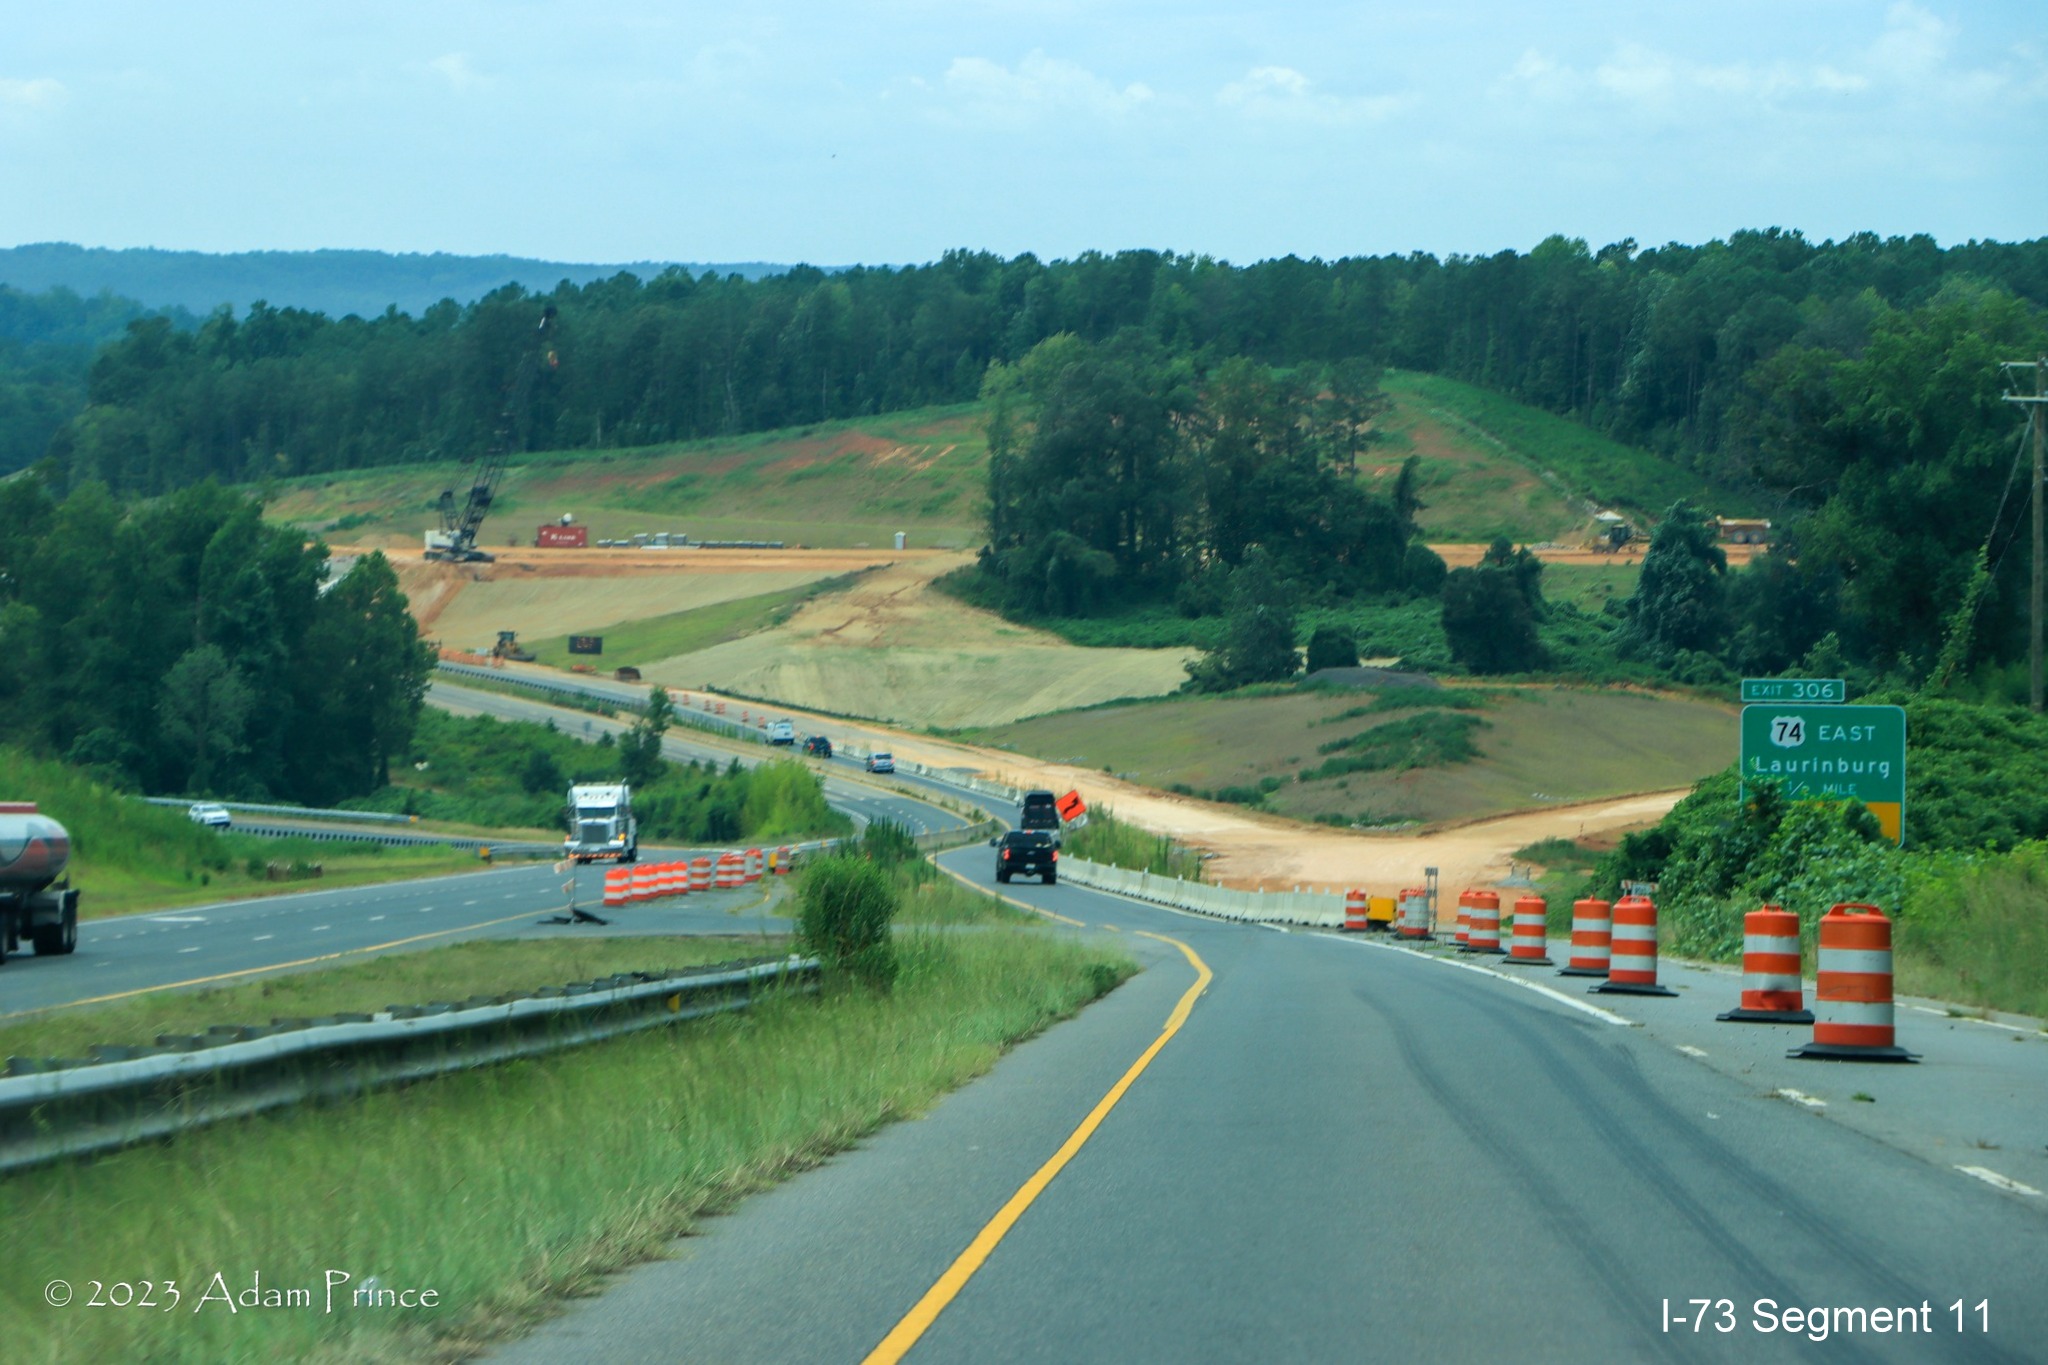 Image of future Bypass exit ramp construction on Business 74 West prior in I-73/I-74 Rockingham
        Bypass construction zone, Adam Prince July 2023